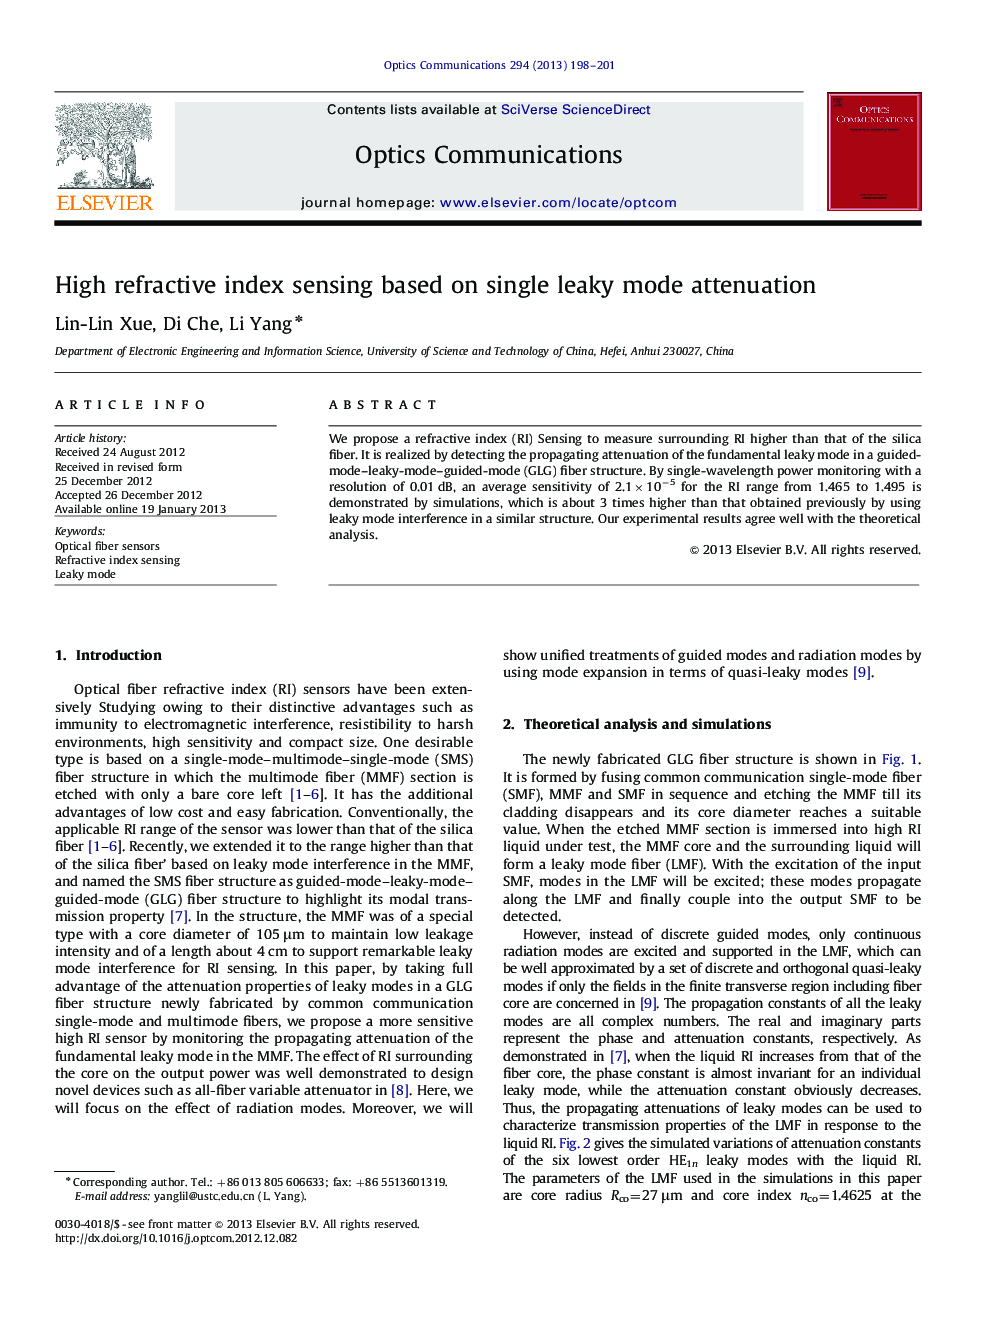 High refractive index sensing based on single leaky mode attenuation